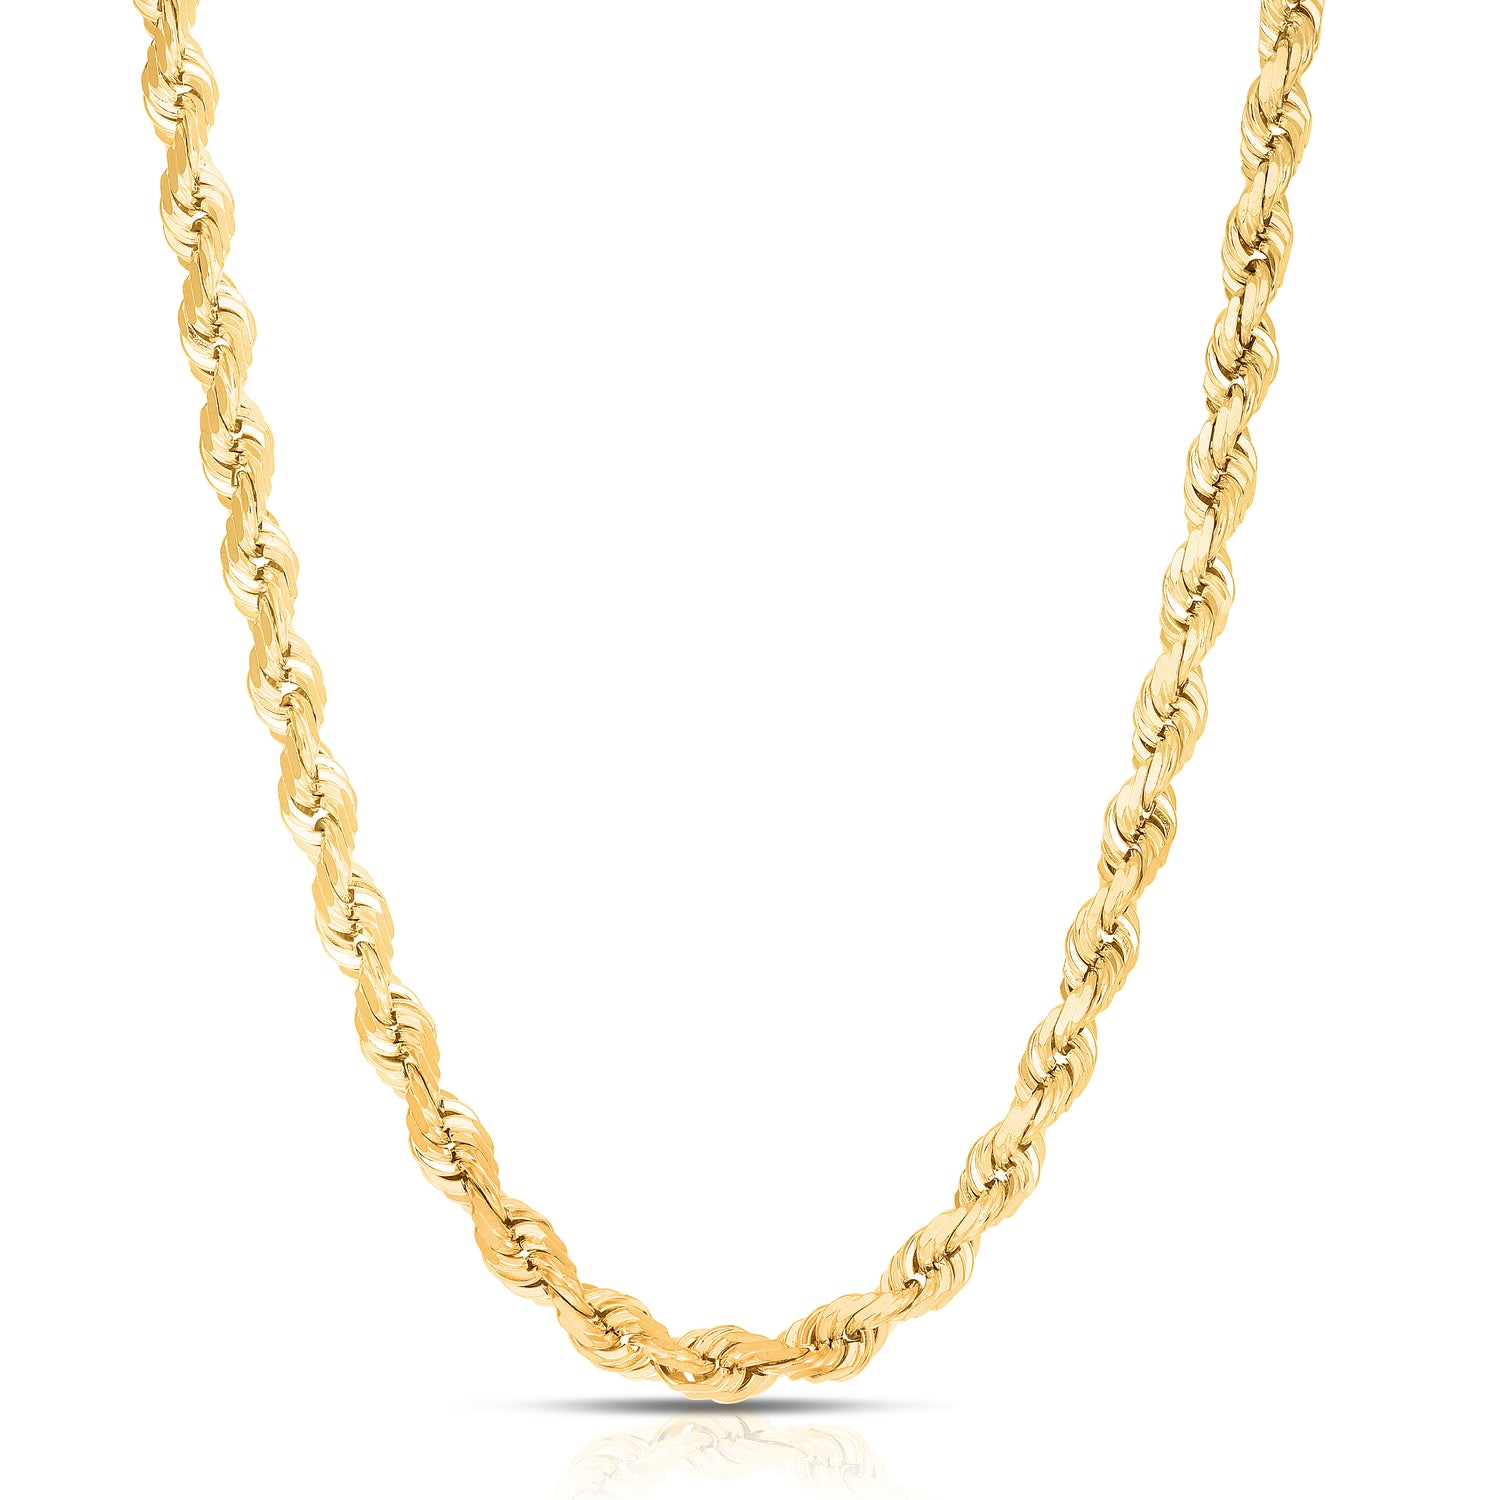 10k Yellow Gold 7mm Solid Diamond Cut Rope Chain Necklace